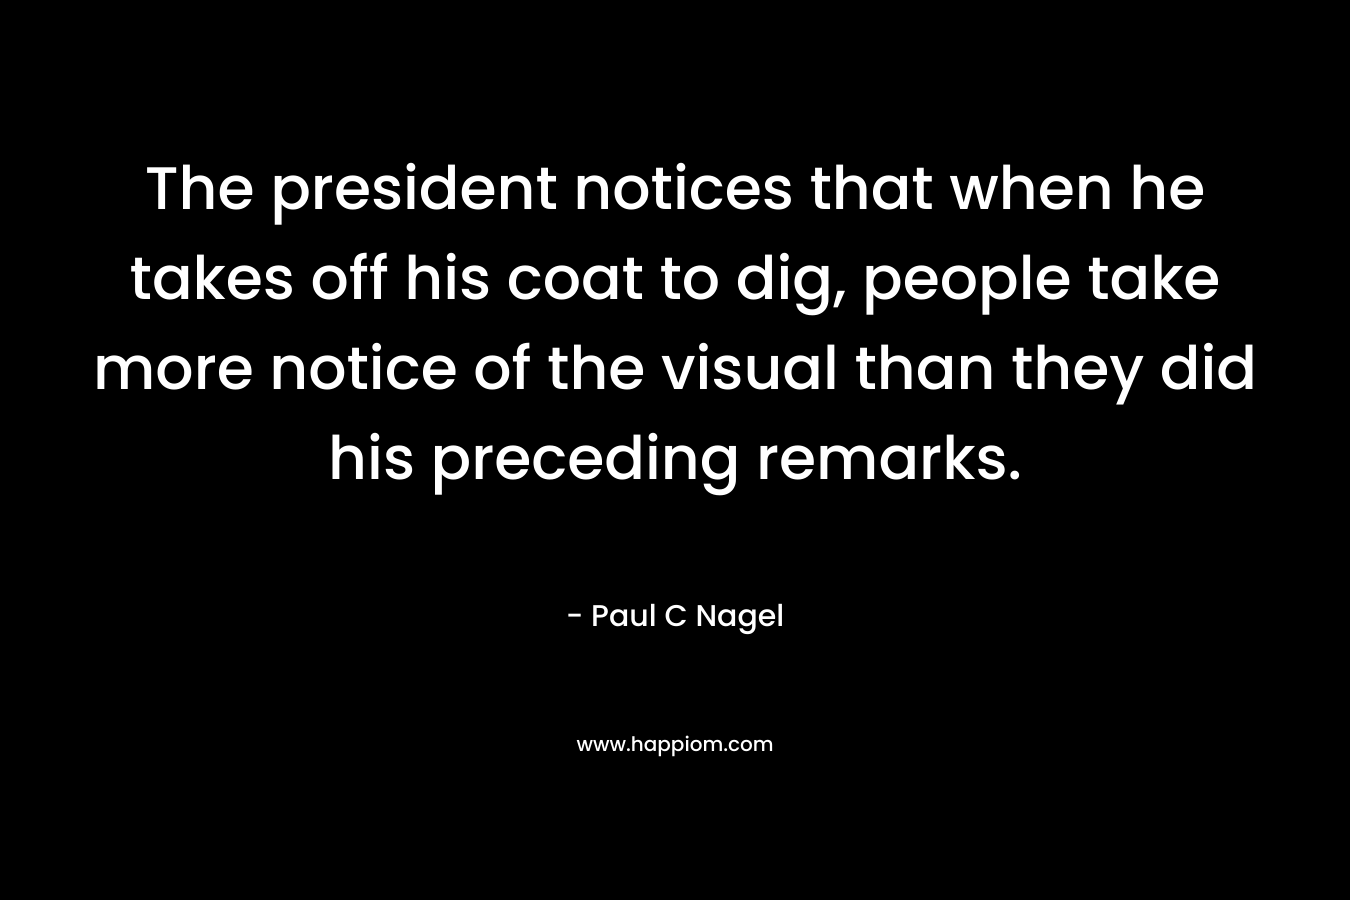 The president notices that when he takes off his coat to dig, people take more notice of the visual than they did his preceding remarks. – Paul C Nagel